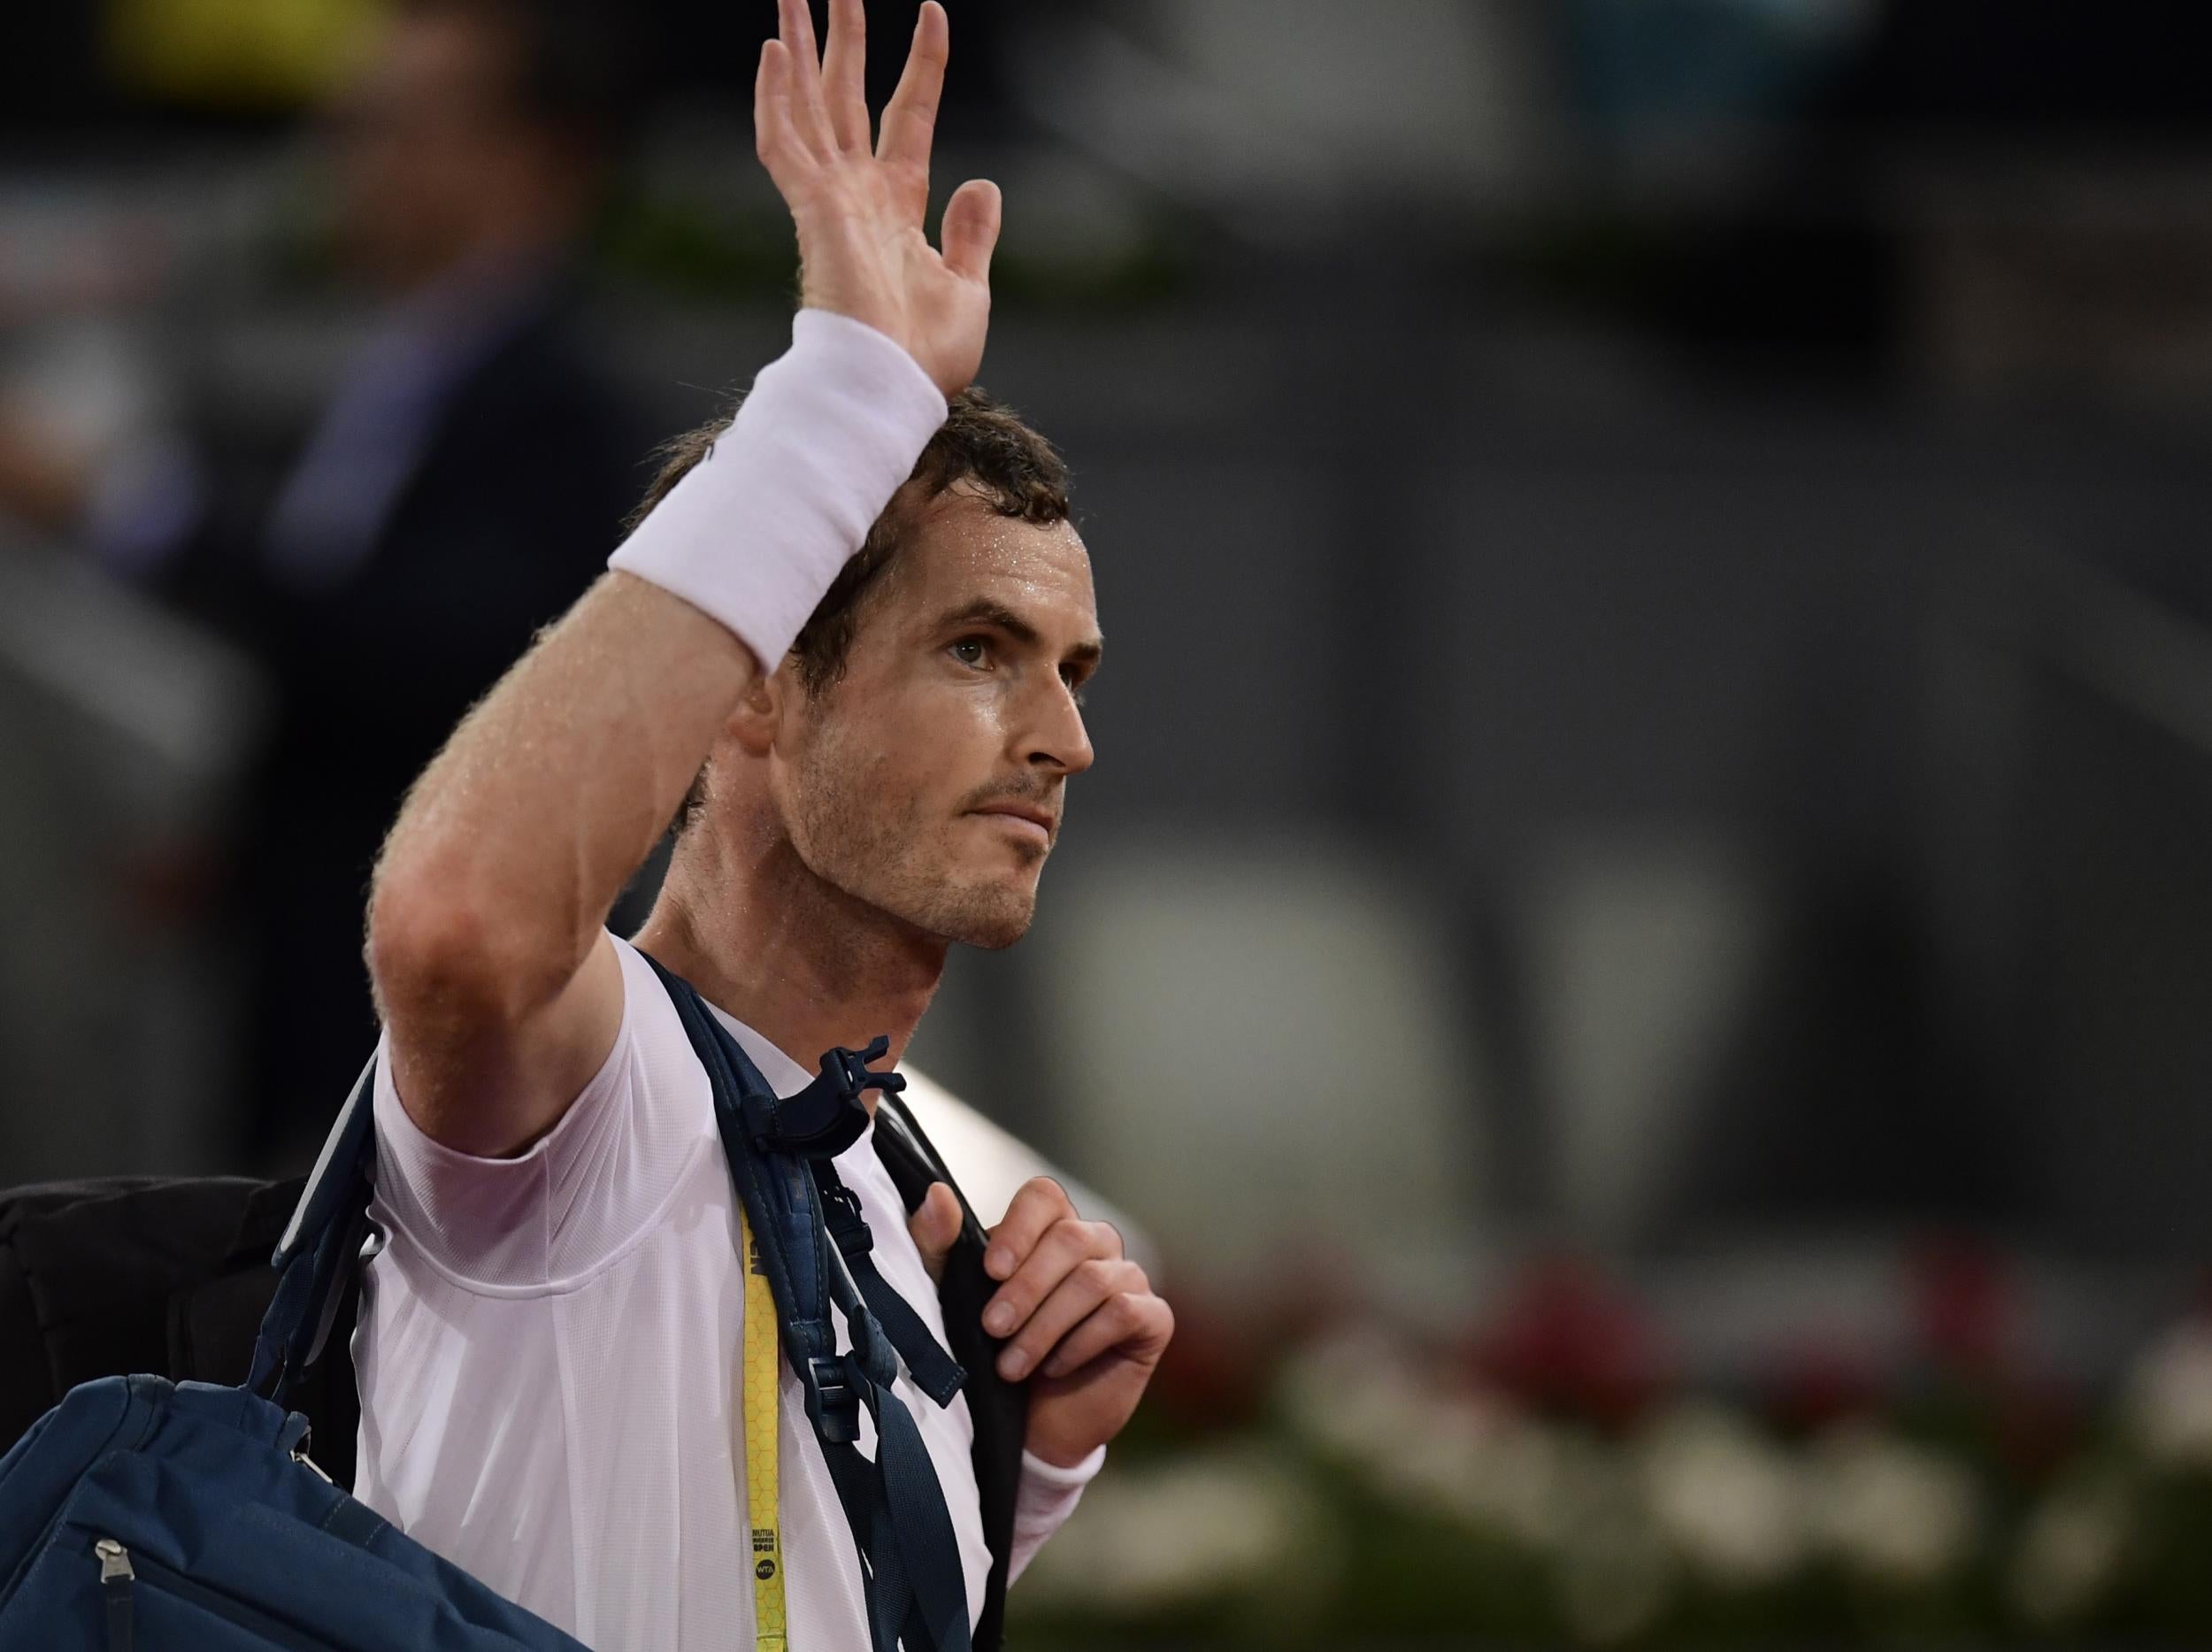 Given his current form it would be a surprise to see Murray defend his Italian Open title